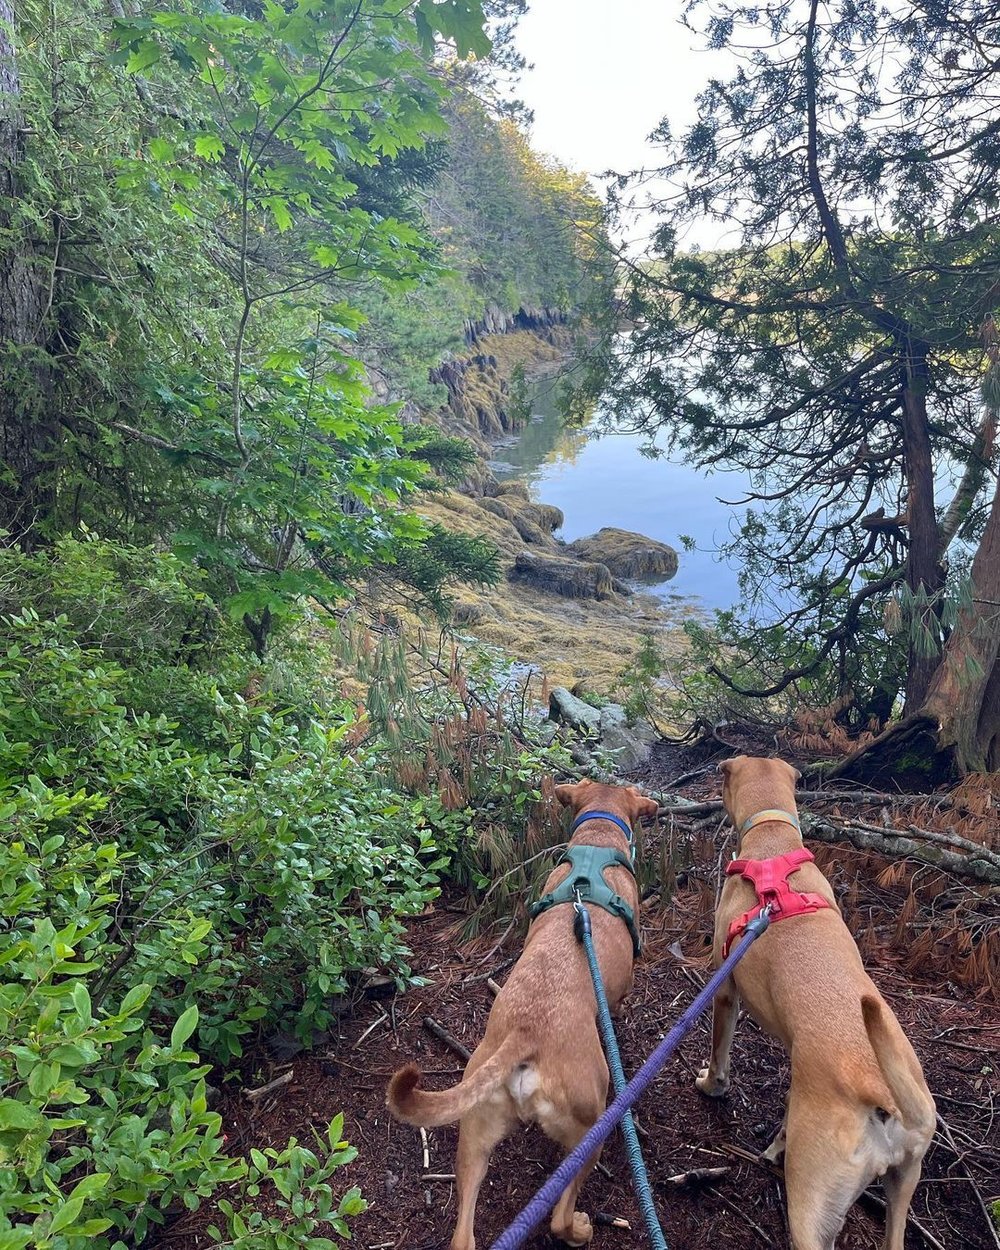 One of the best things about April is being able to get out and play like our Furiends @roxyandgoose 🐶 🐶 They were ready for an adventure! Have you gotten to explore outside yet this Spring?

#EvolvePets #ChooseEvolve #AdventureDogs